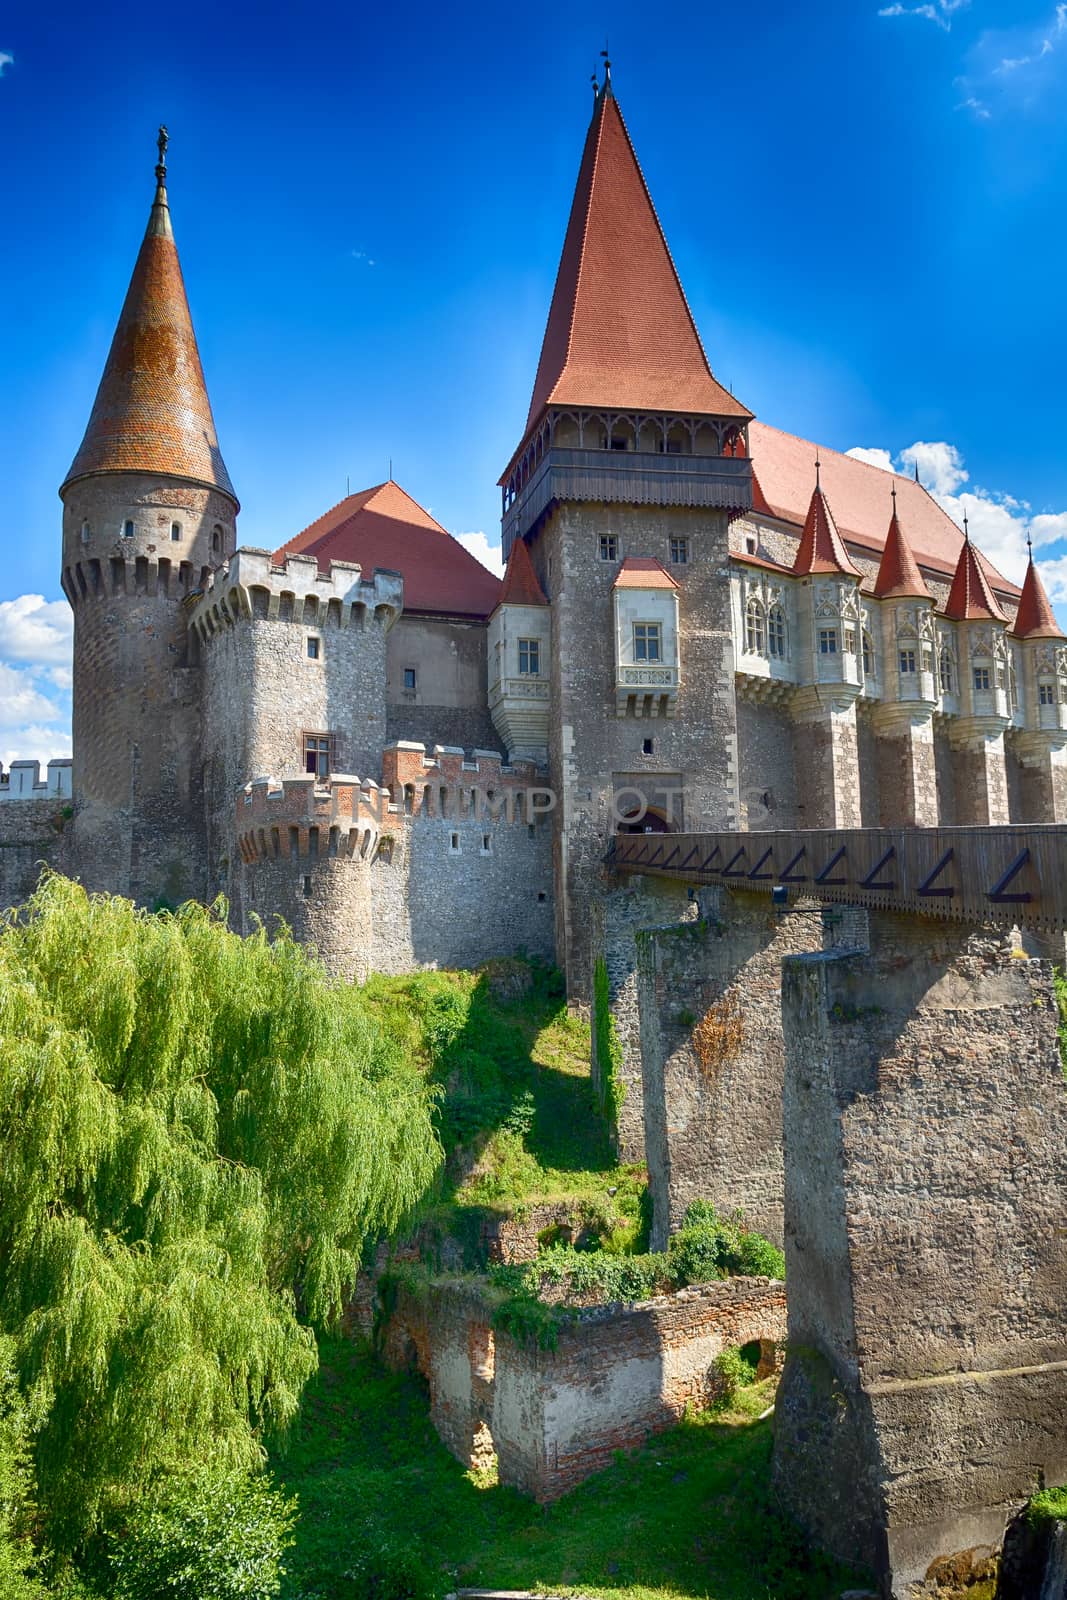 The Corvinesti castle also known as the Hunyad castle, is a Gothic-Renaissance castle in Hunedoara (Transylvania), Romania. by constantinhurghea